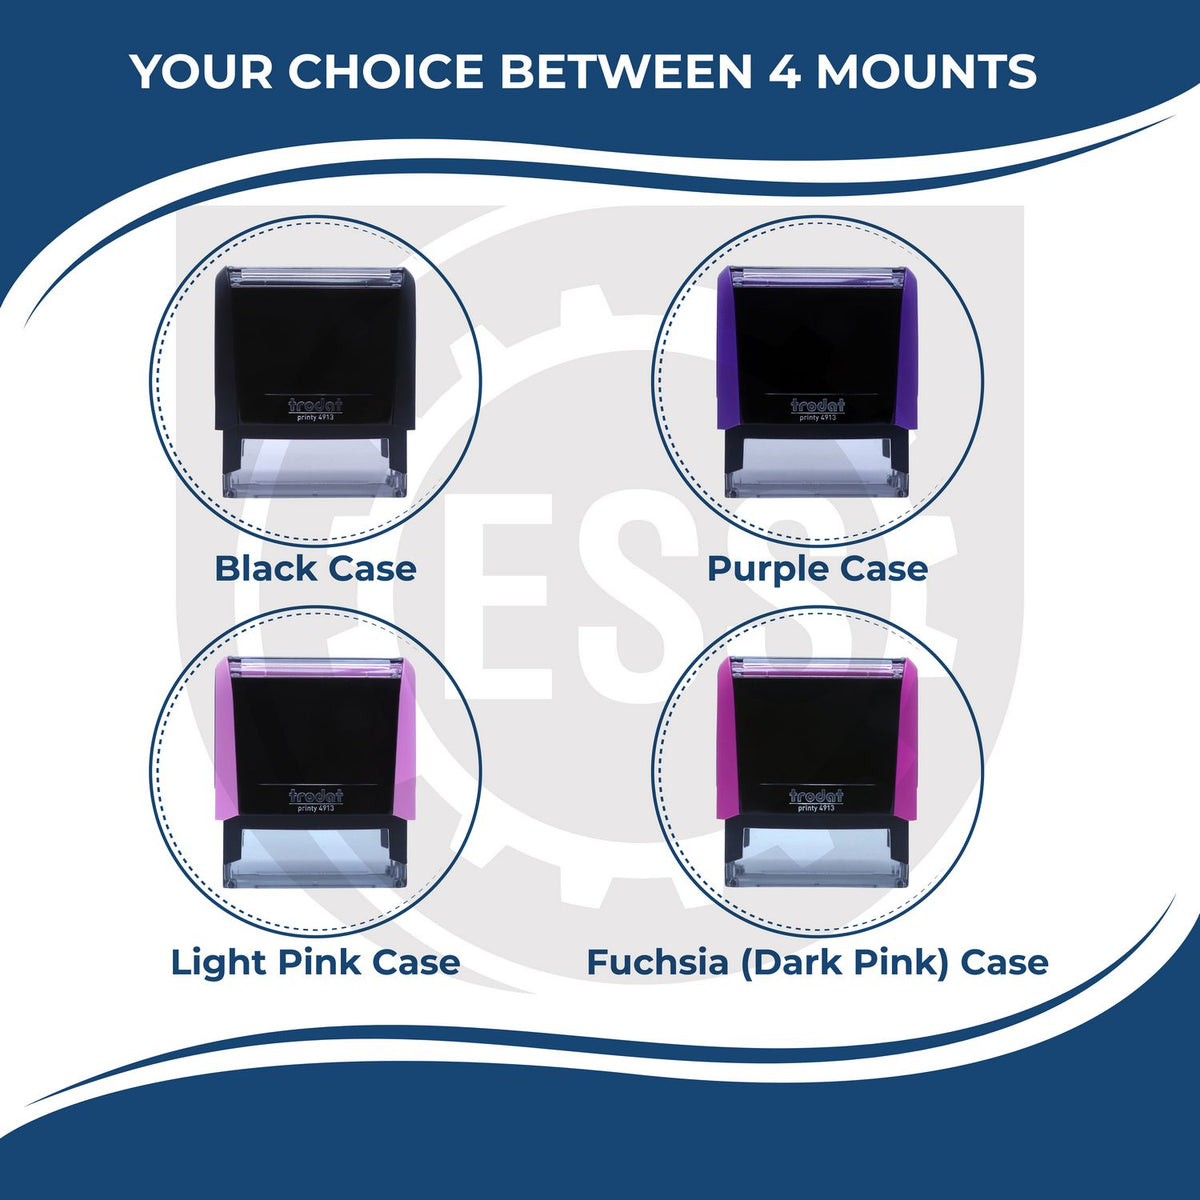 A picture of different colored mounts for the Self-Inking State Seal California Notary Stamp featurning a Red, Blue or Black Mount